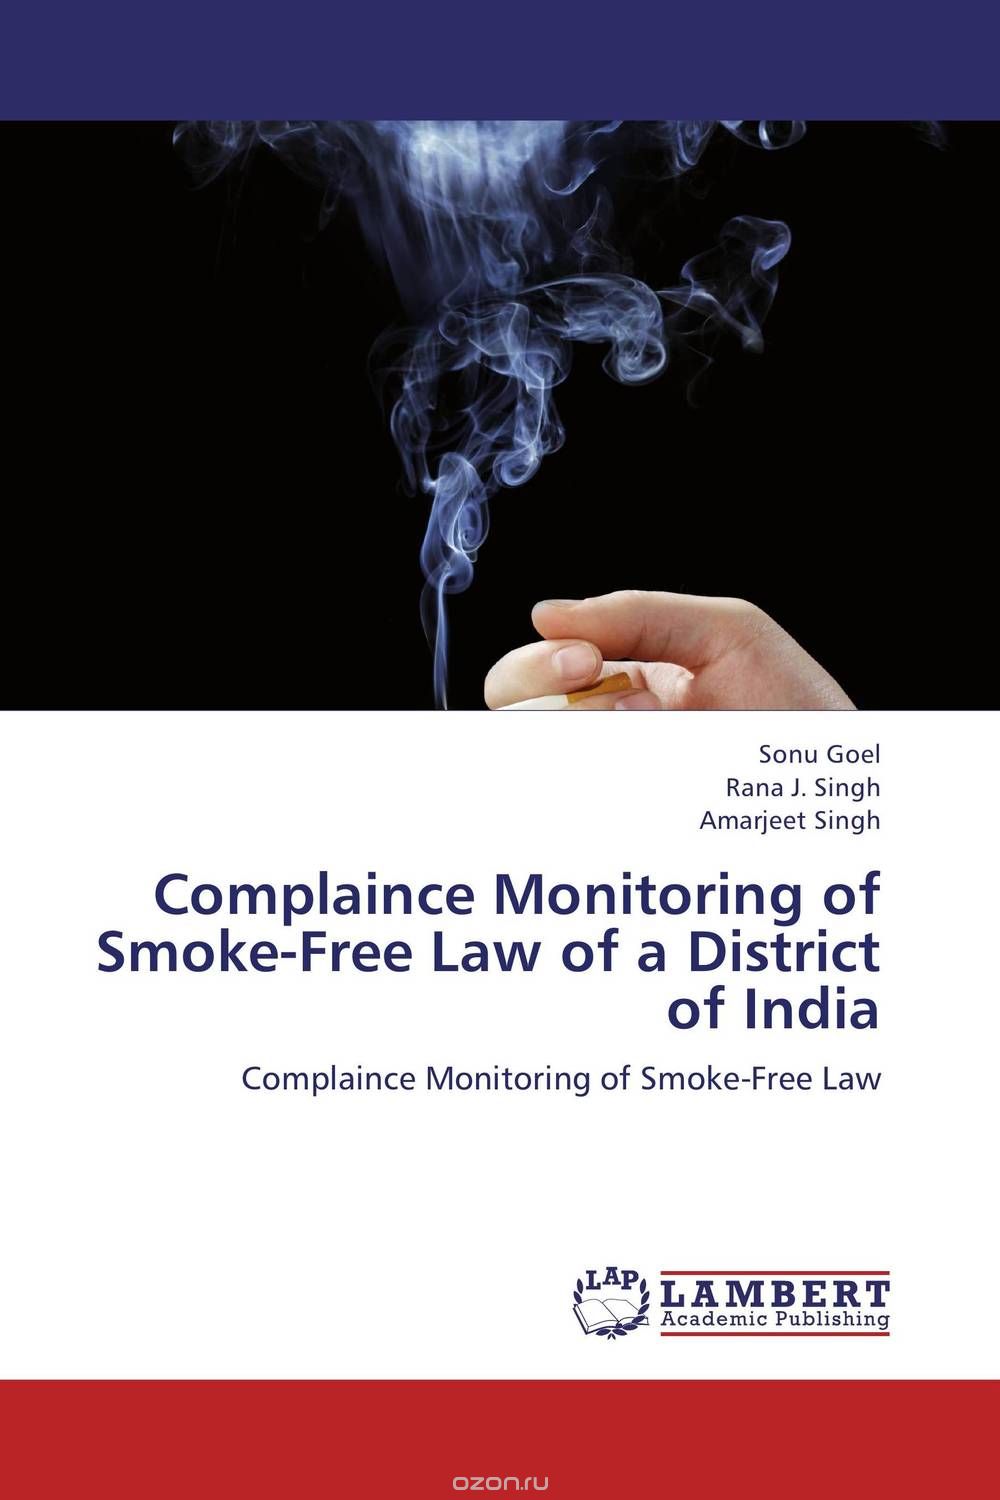 Скачать книгу "Complaince Monitoring of Smoke-Free Law of a  District of India"